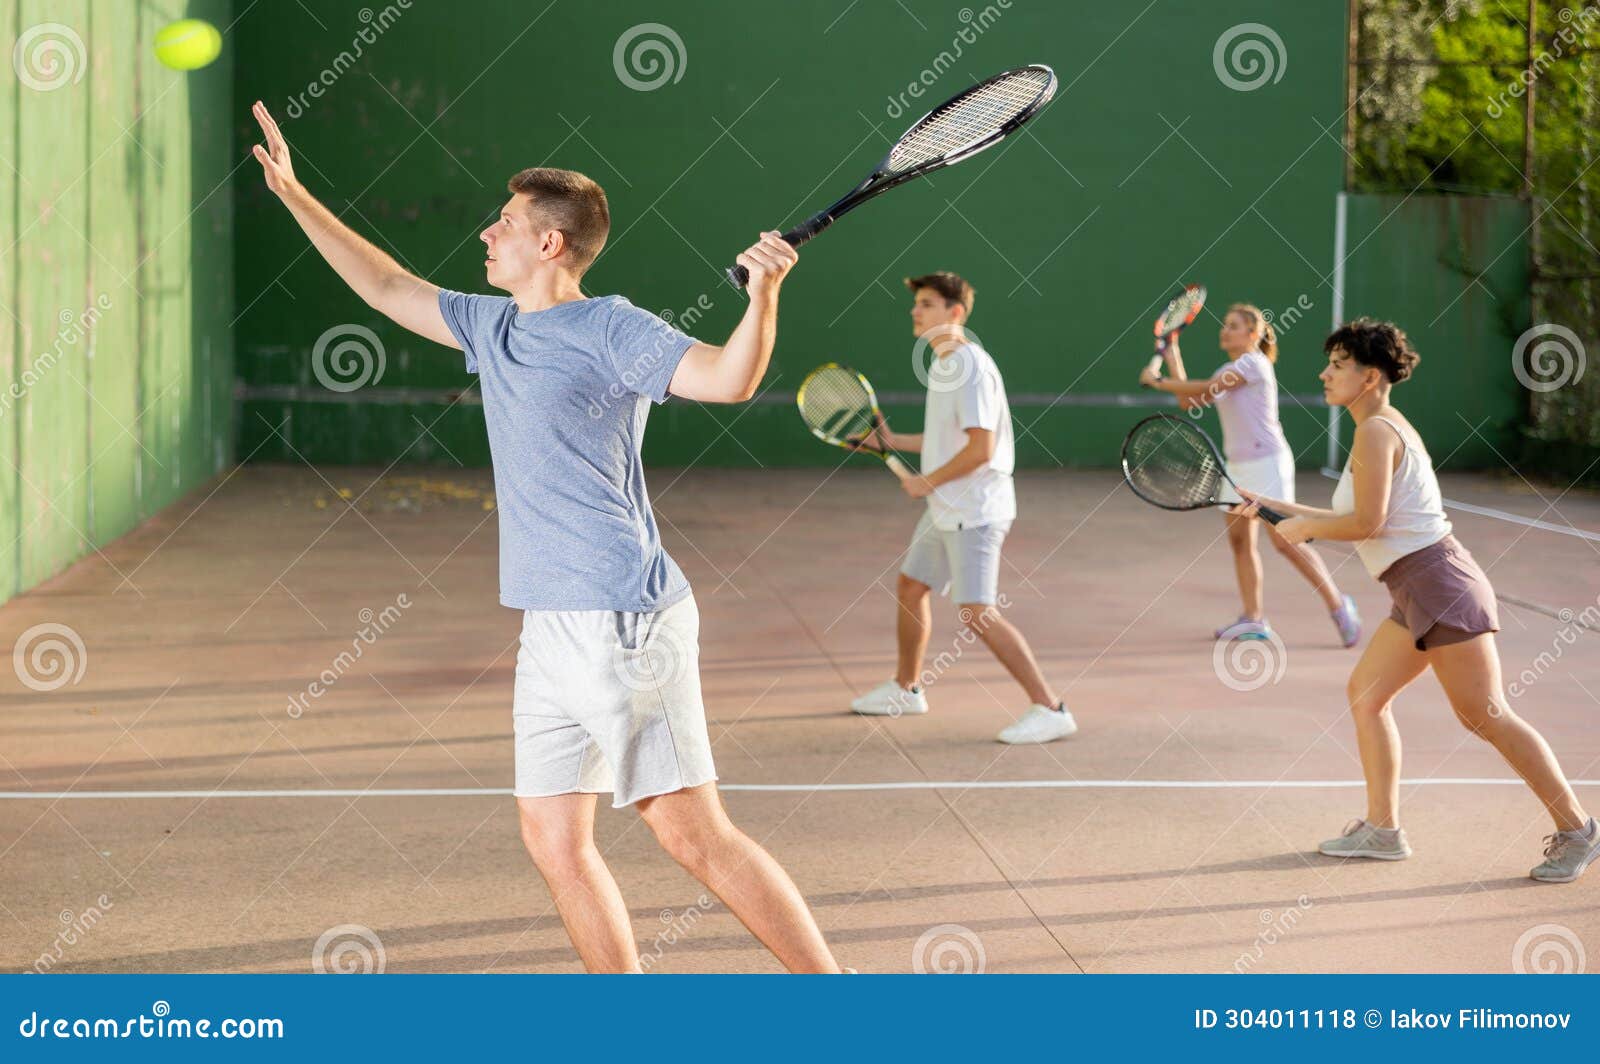 young man playing frontenis on outdoor pelota court